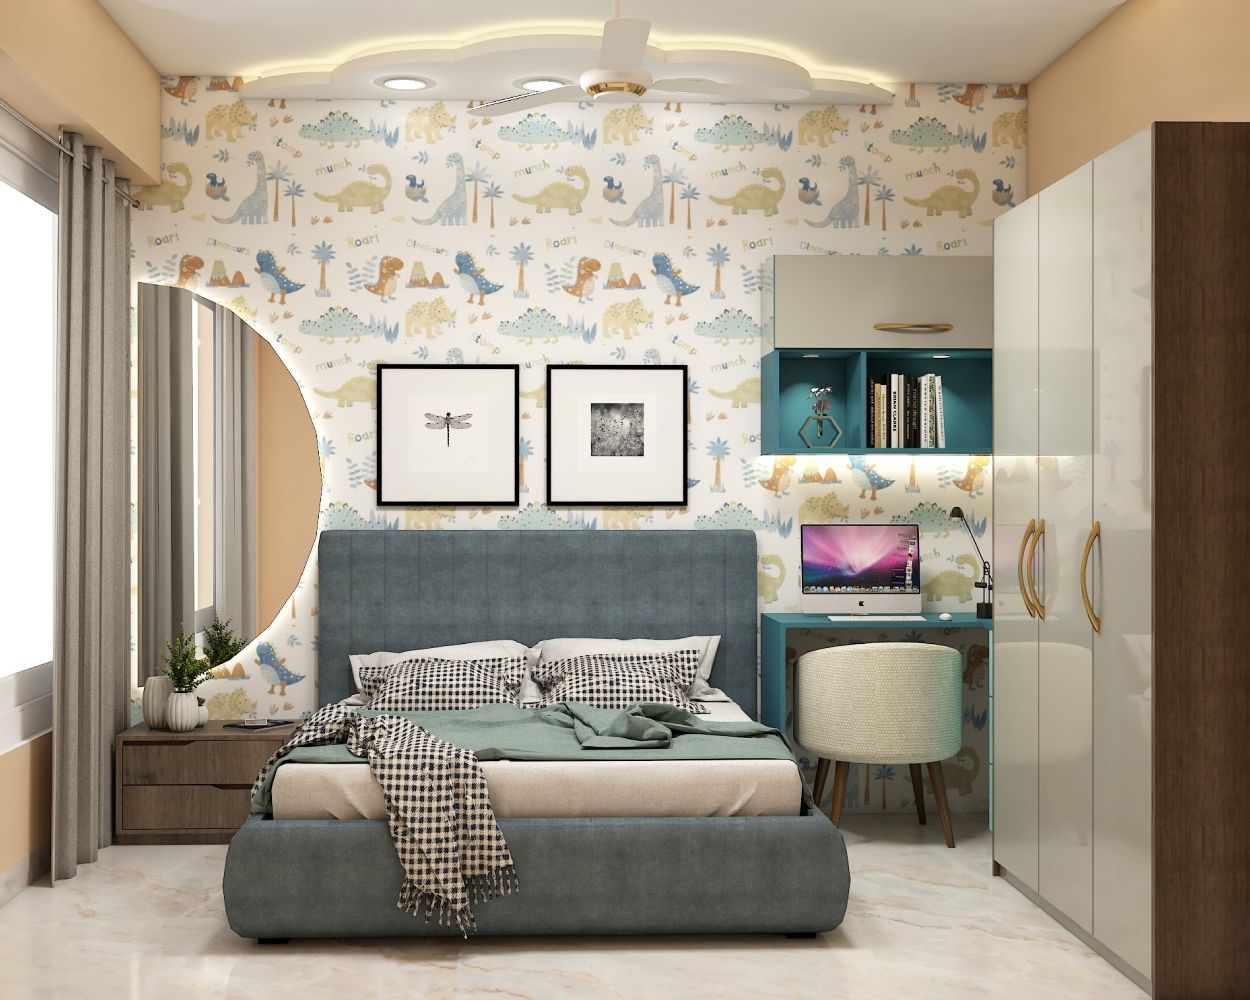 Modern Boys Room Design With A Bluish-Grey Upholstered Bed